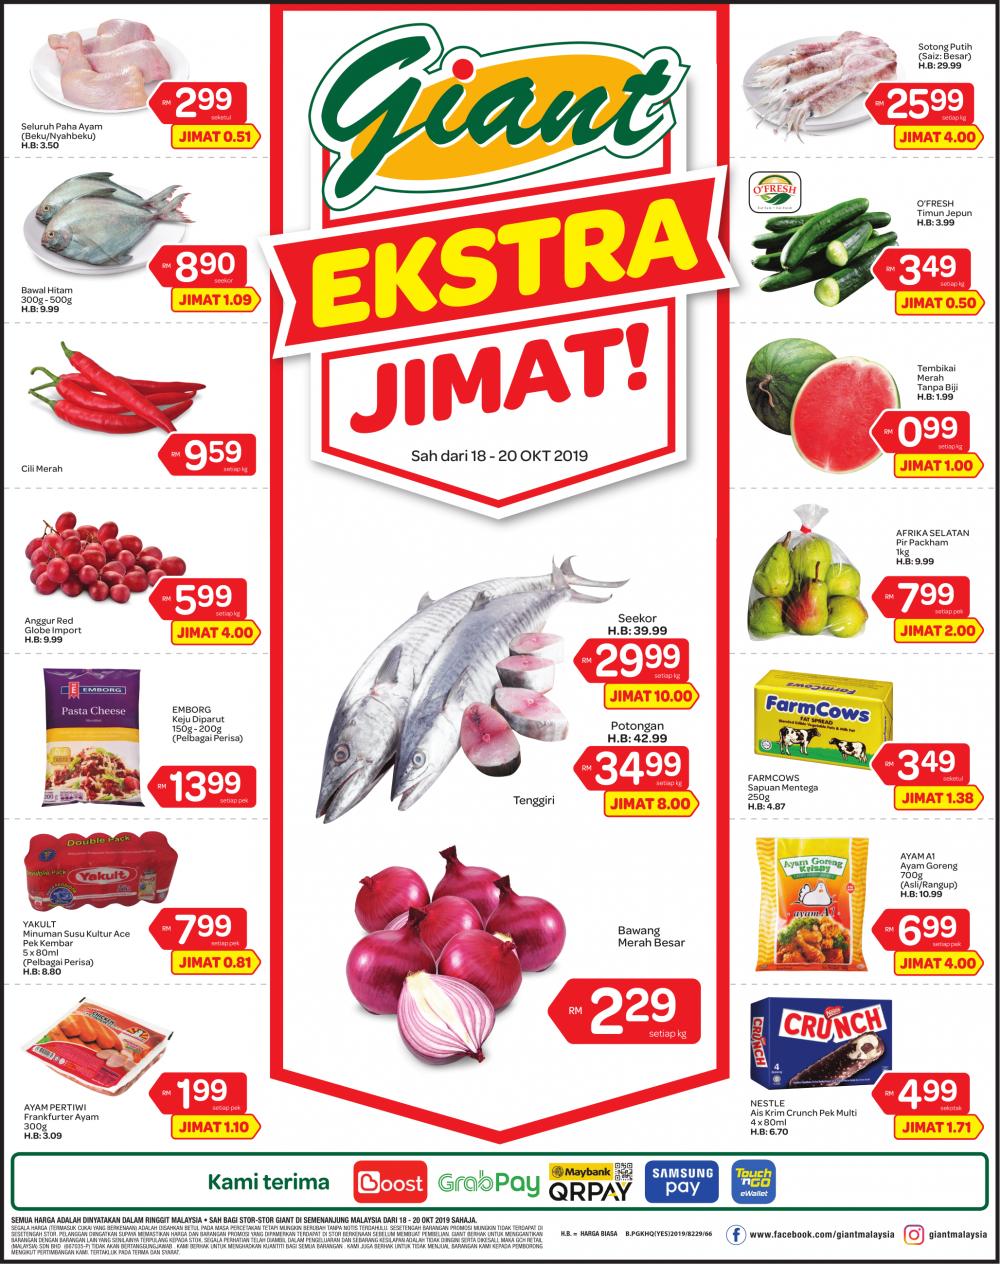 Giant Extra Savings Promotion (18 October 2019 - 20 October 2019)